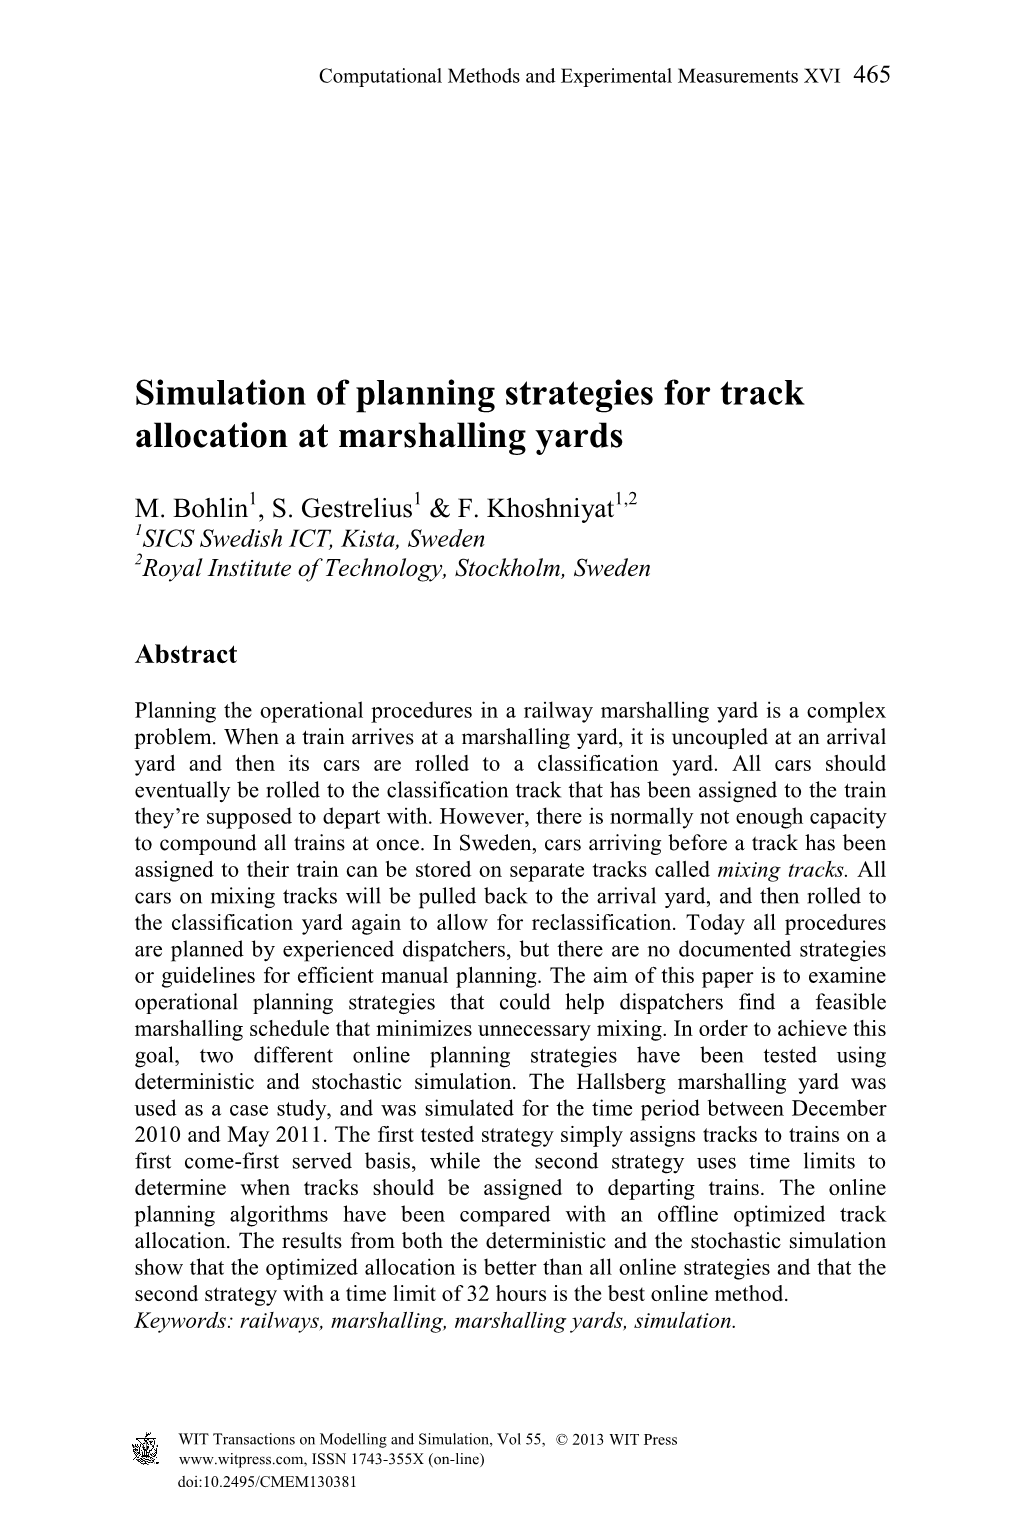 Simulation of Planning Strategies for Track Allocation at Marshalling Yards